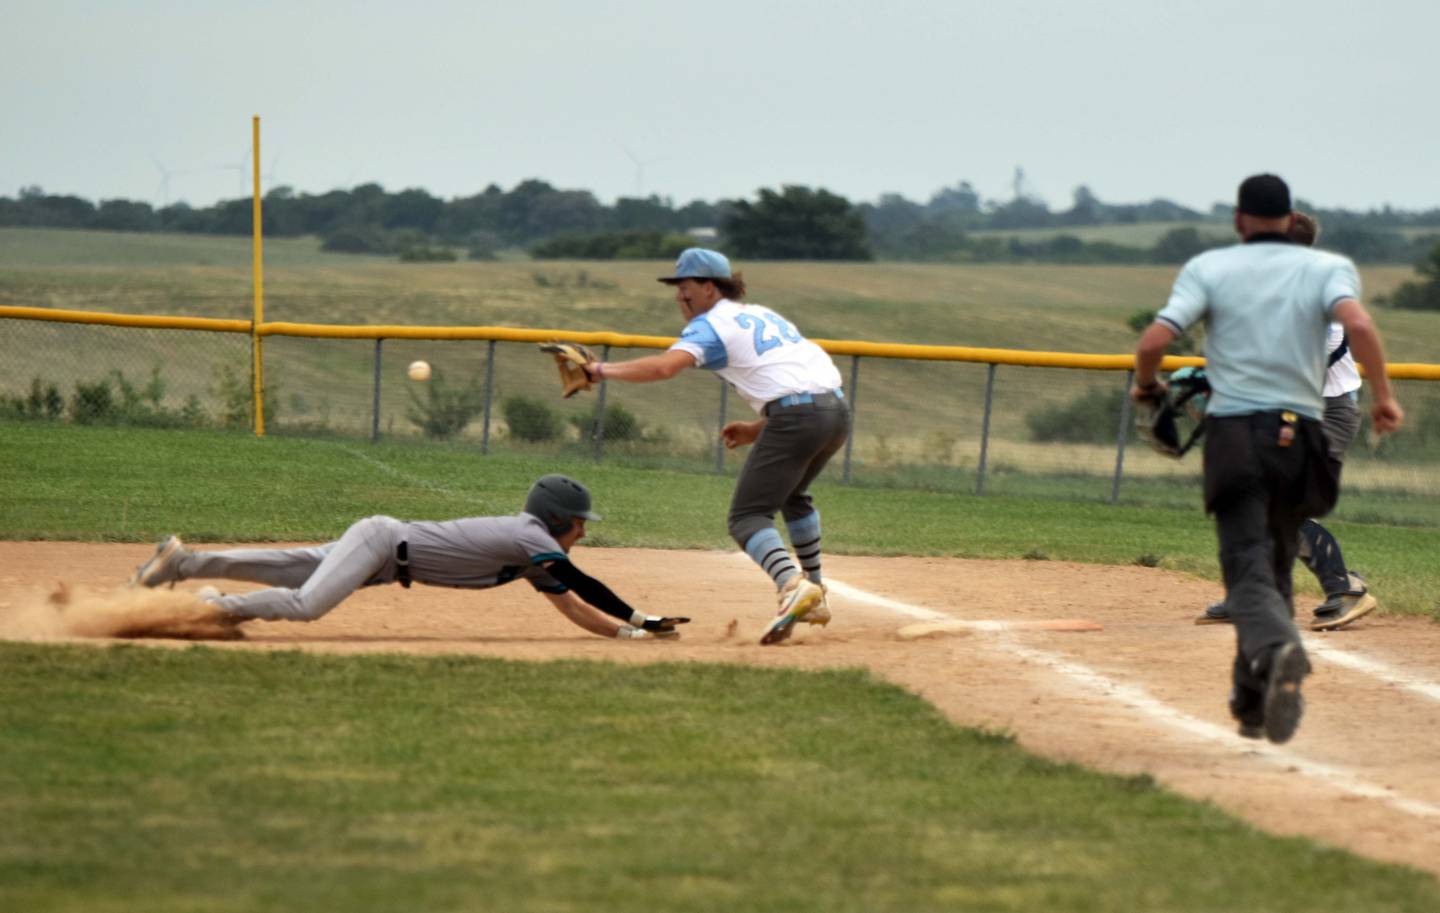 Isaac Currin of Southwest Valley dives back to tag as he was caught in a pickle between first and second base. East Union pitcher Terrian Islas covers first base.